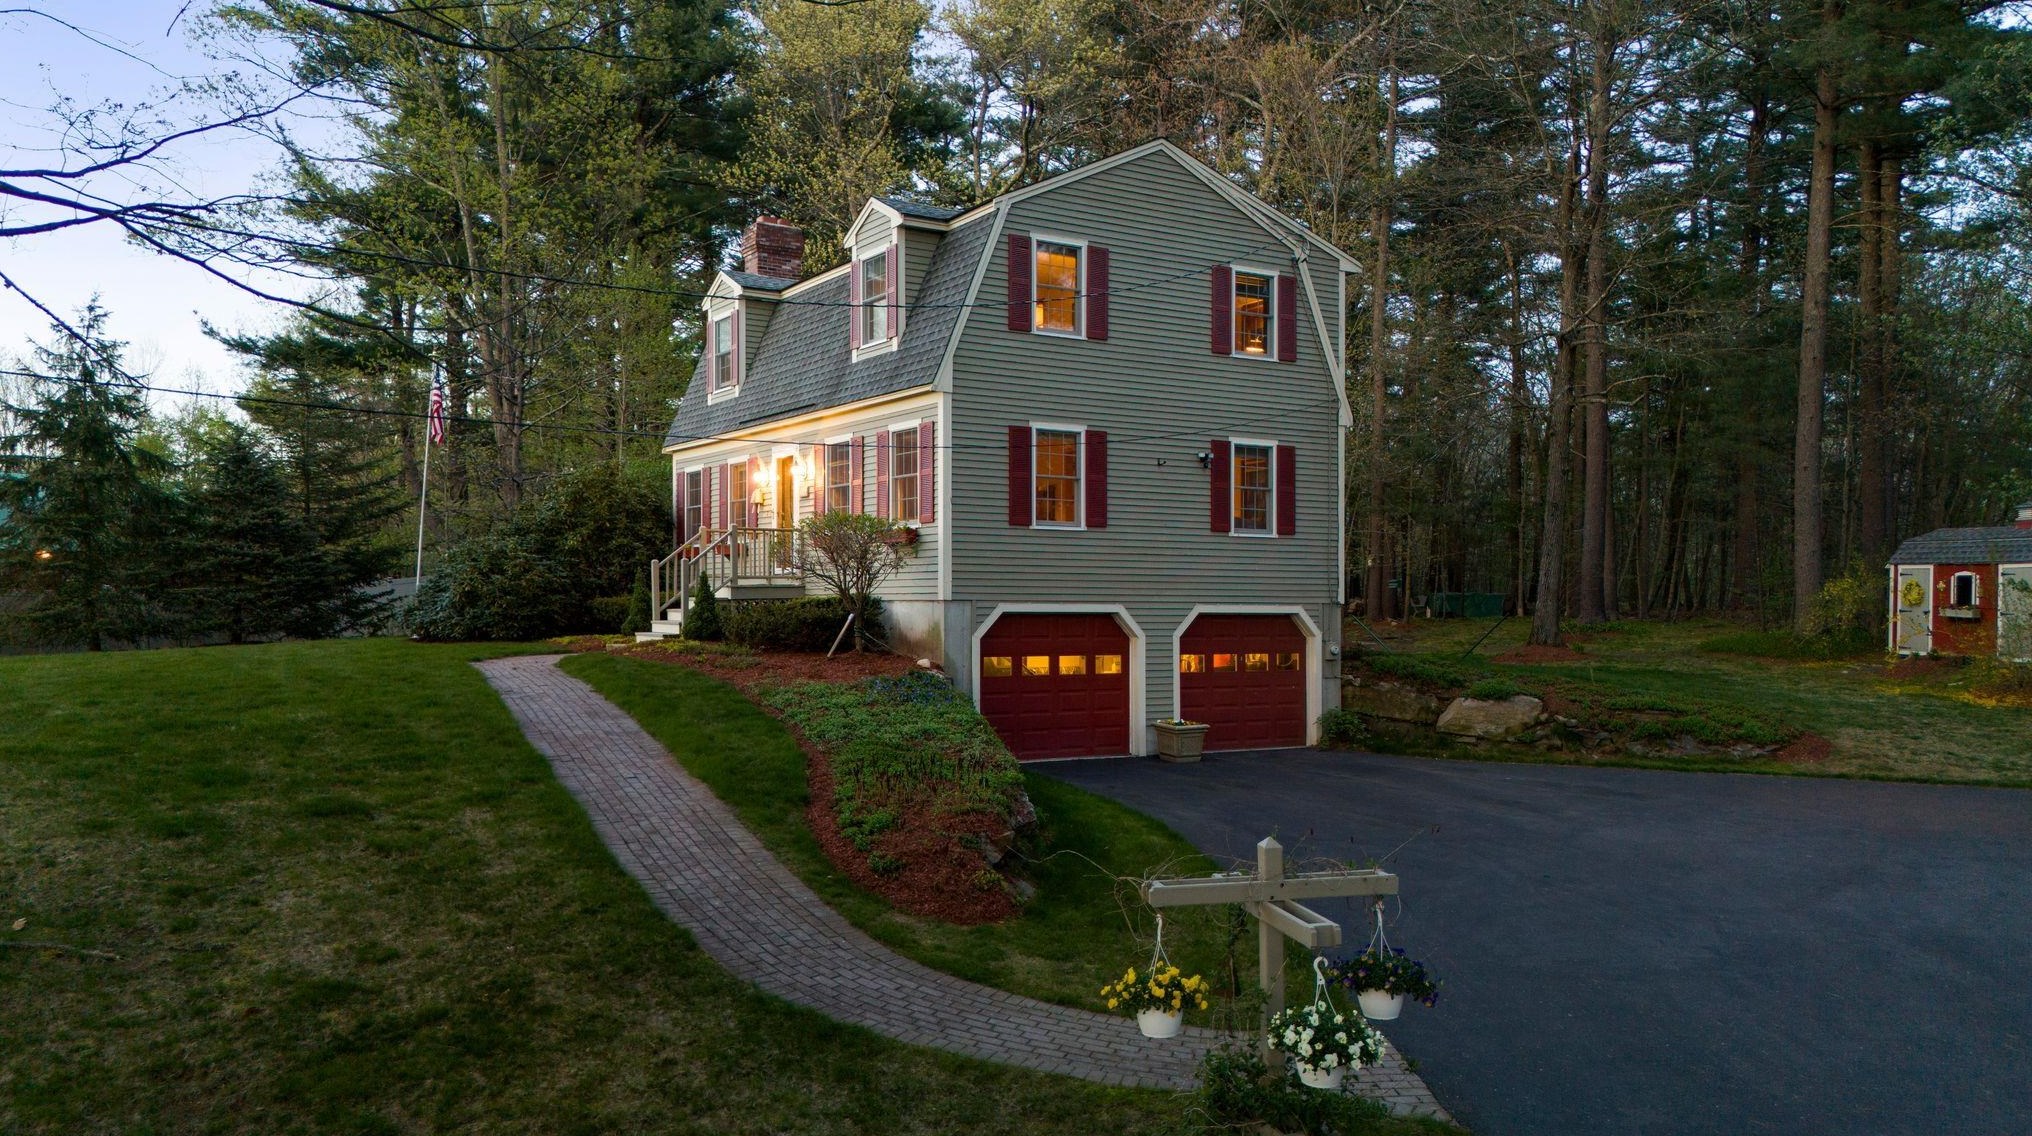 134 Fordway Ext, Derry, NH